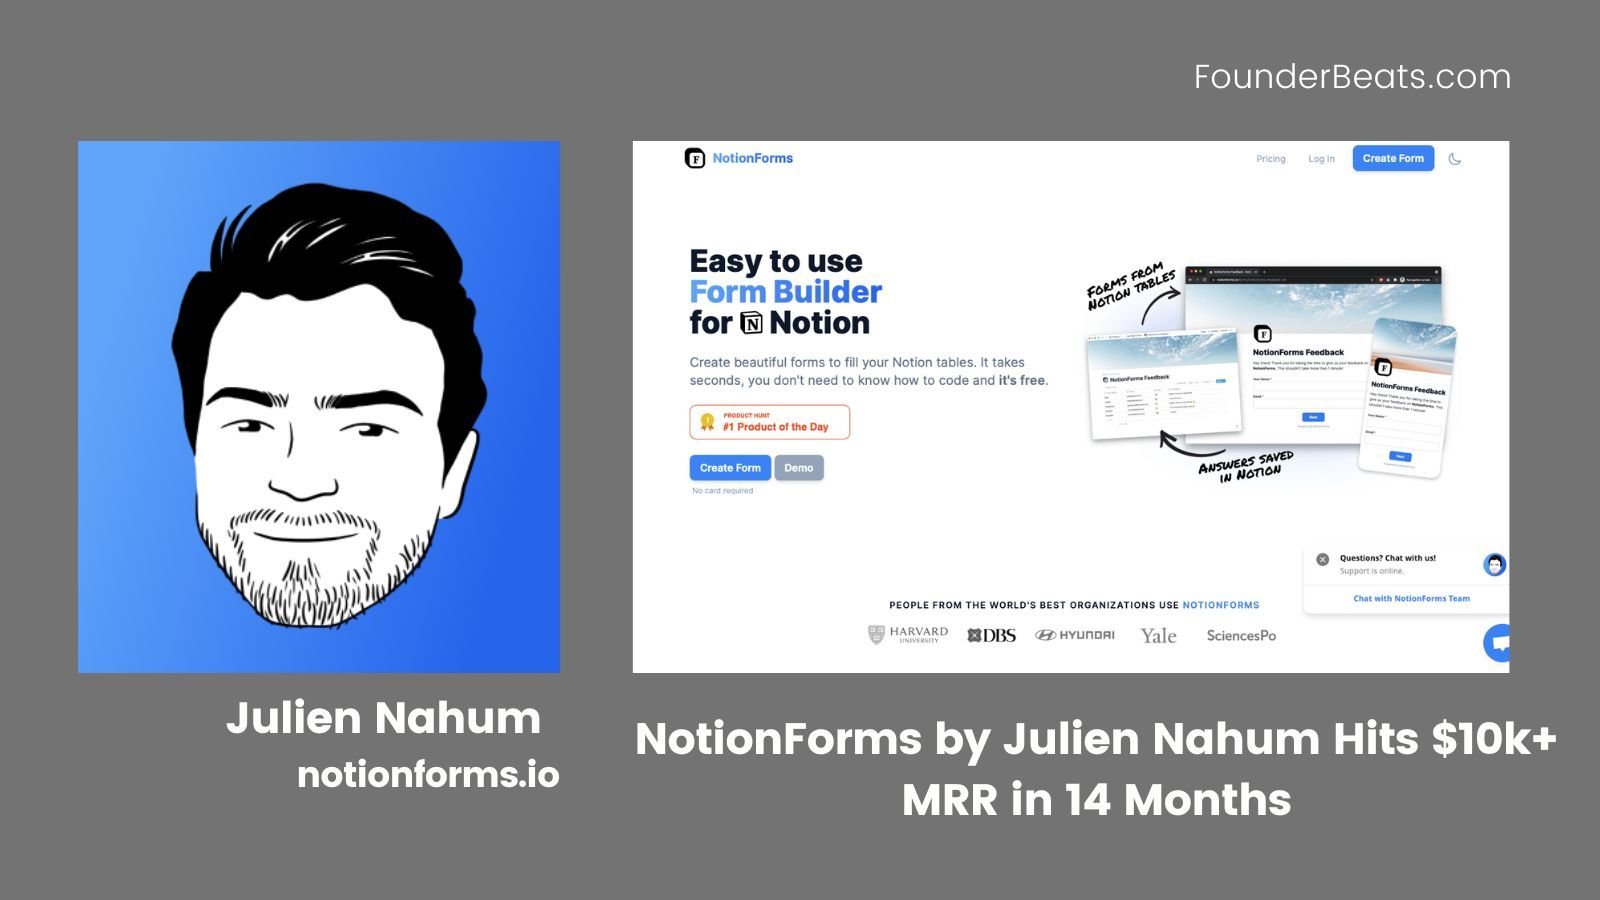 NotionForms by Julien Nahum Hits $10k+ MRR in 14 Months